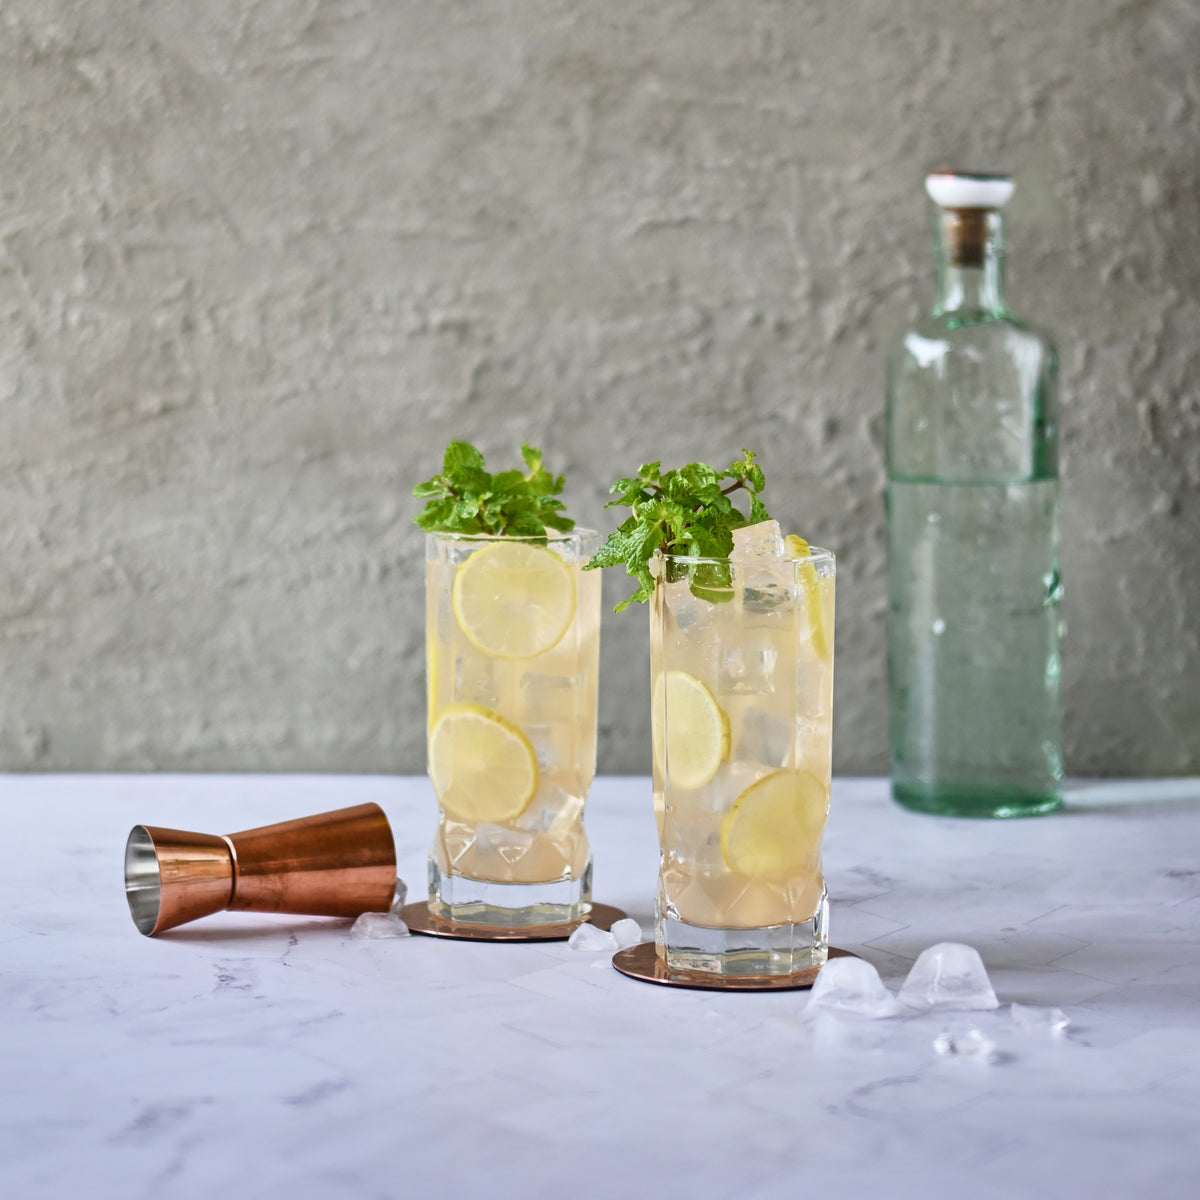 A photograph of two mojitos being prepared and served in clear glasses, with a copper jigger and ice cubes visible below. The mojitos have a pale green color and are garnished with sprigs of fresh mint on top and lime cross sections floating in the drink